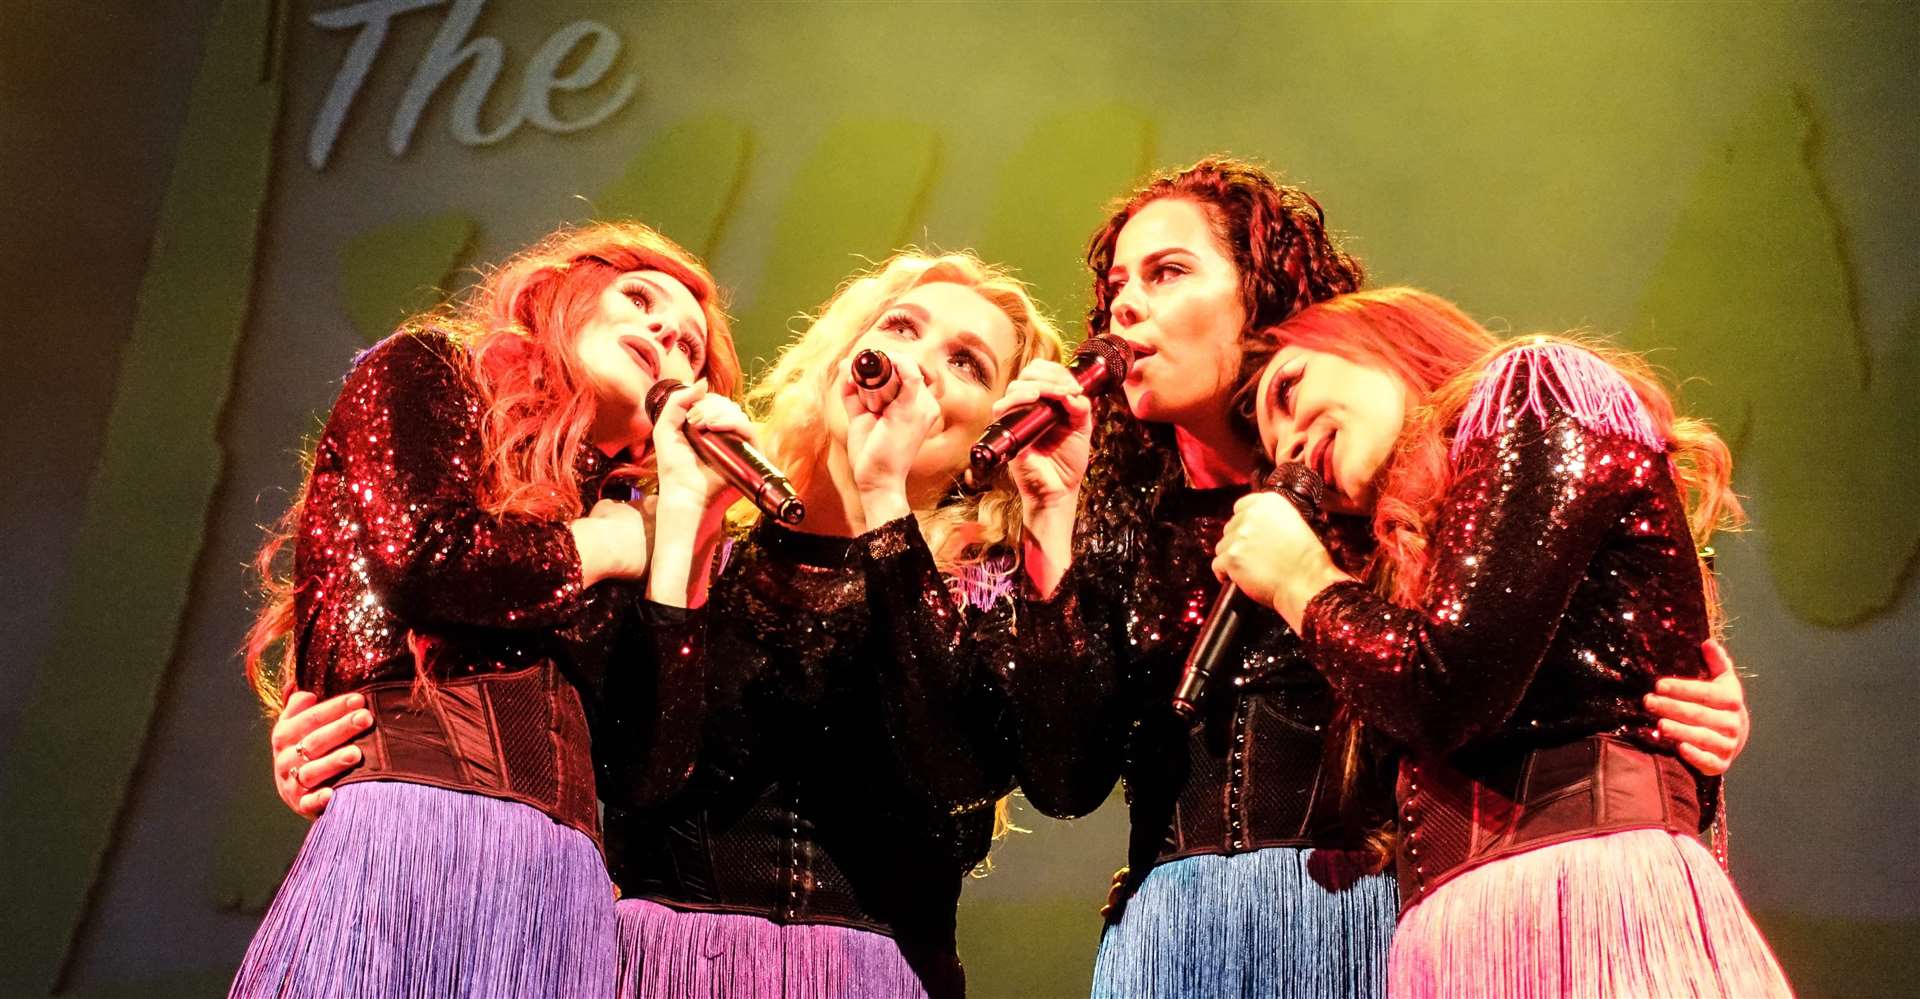 The Little Mix Experience have several dates in the county